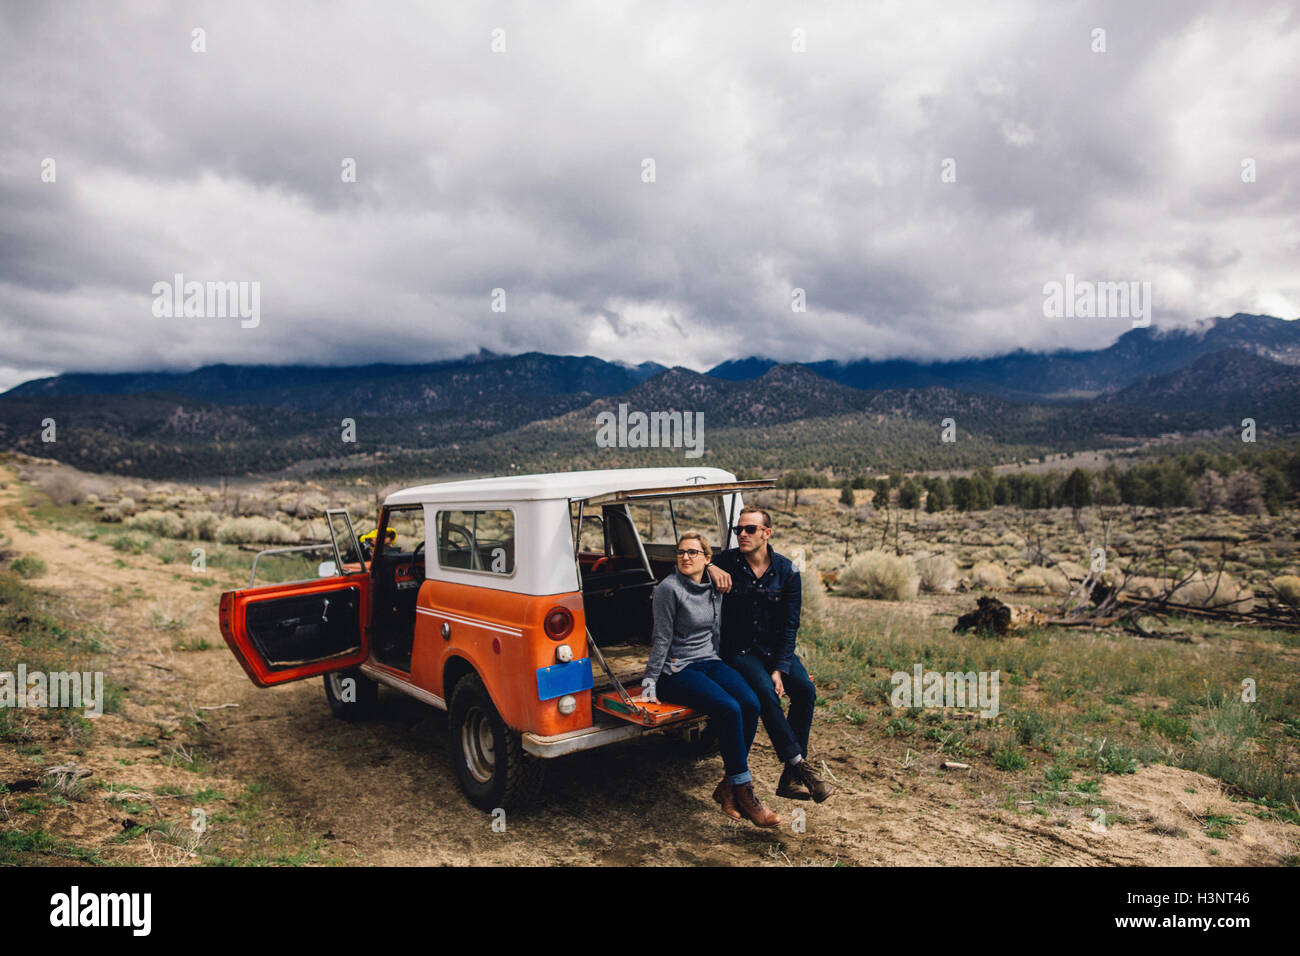 Couple with vehicle on scrubland by mountains, Kennedy Meadows, California, USA Stock Photo